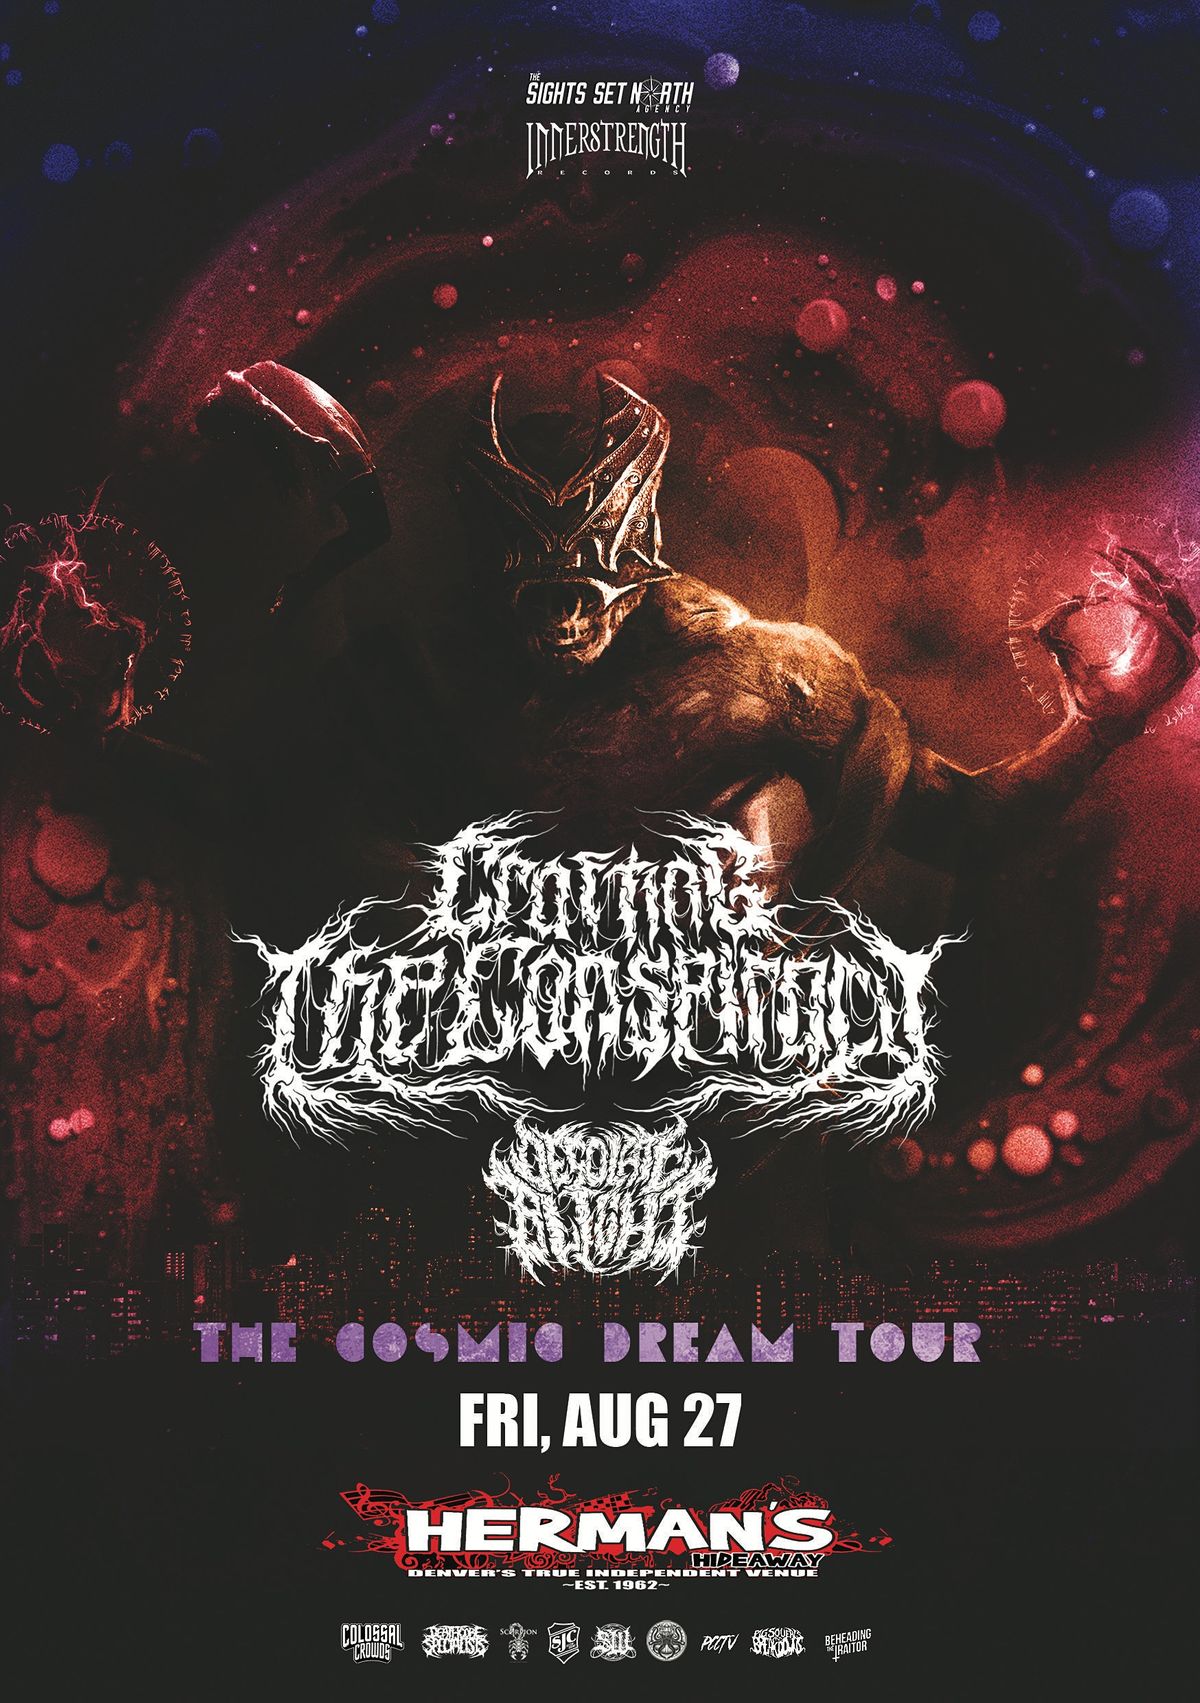 Crafting the Conspiracy \/ Desolate Blight (more TBA) AT ANTERO HALL